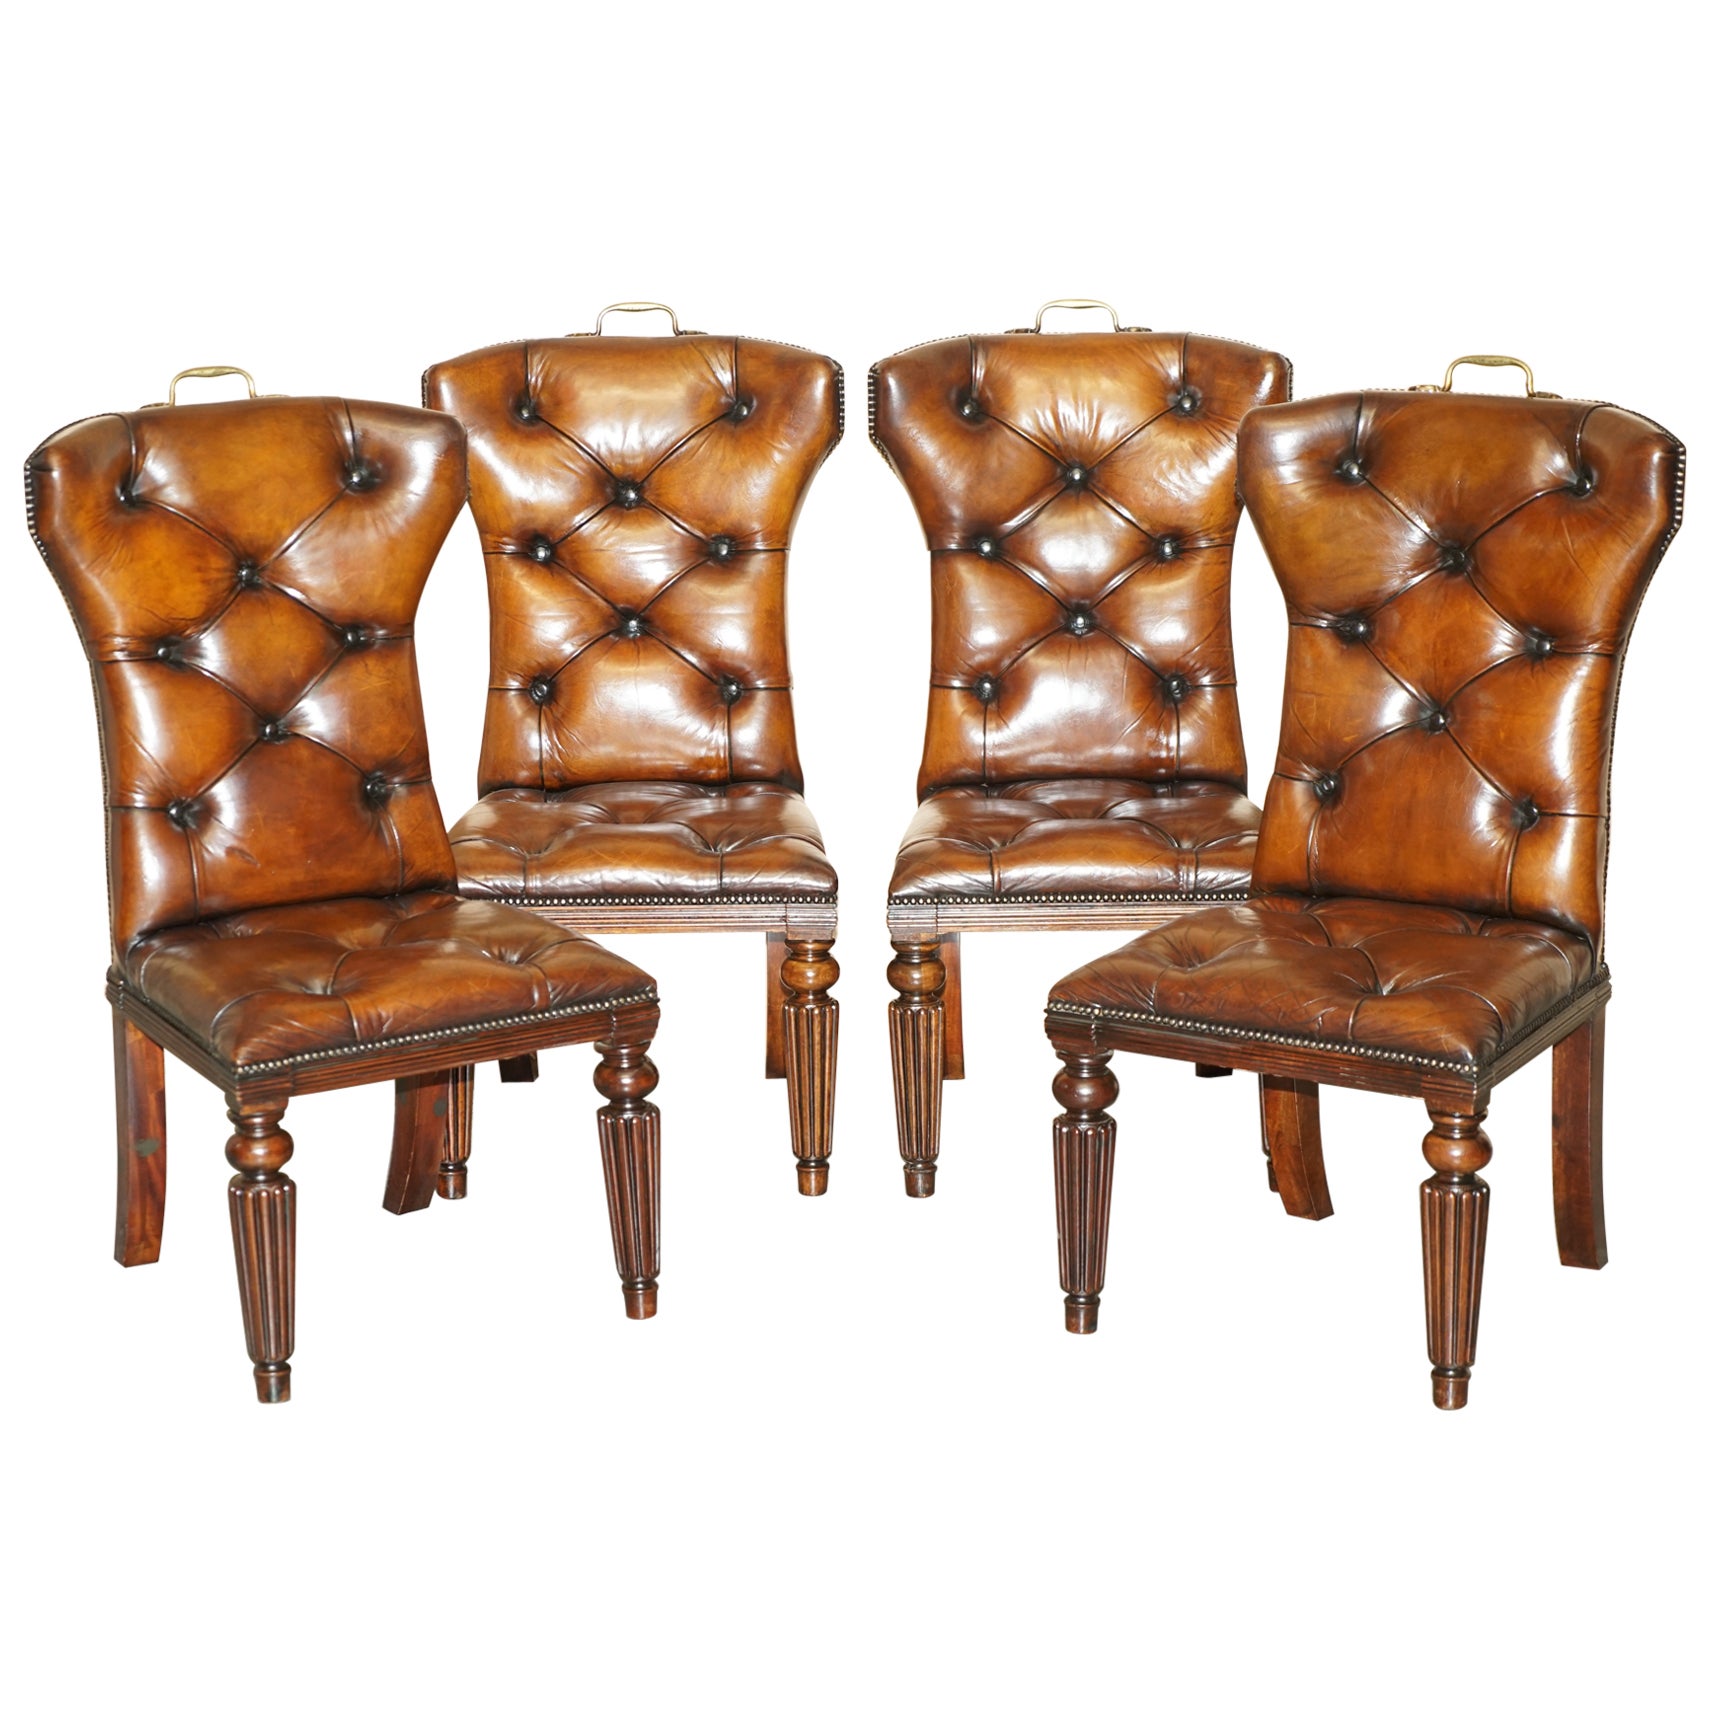 FOUR RESTORED RALPH LAUREN BROWN LEATHER CHESTERFIELD DINING CHAIRs